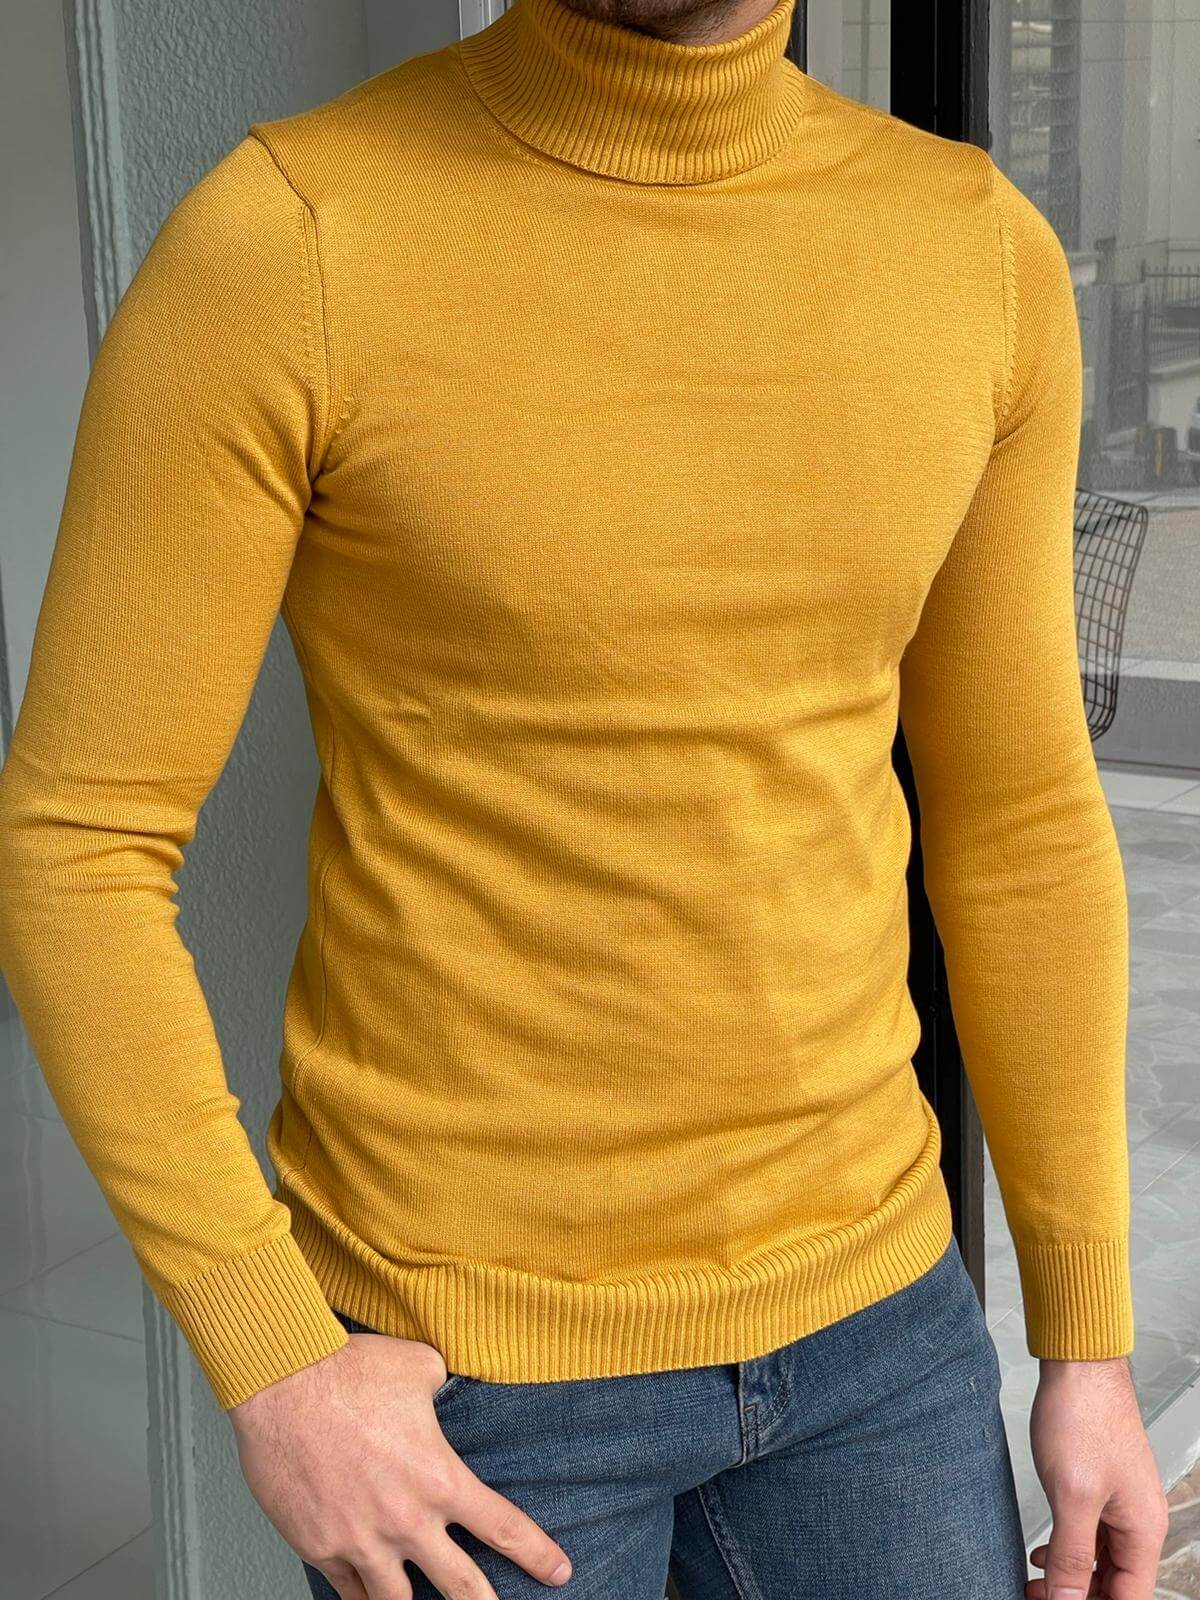 A stylish yellow turtleneck sweater worn by a model, showcasing its vibrant color and modern design."